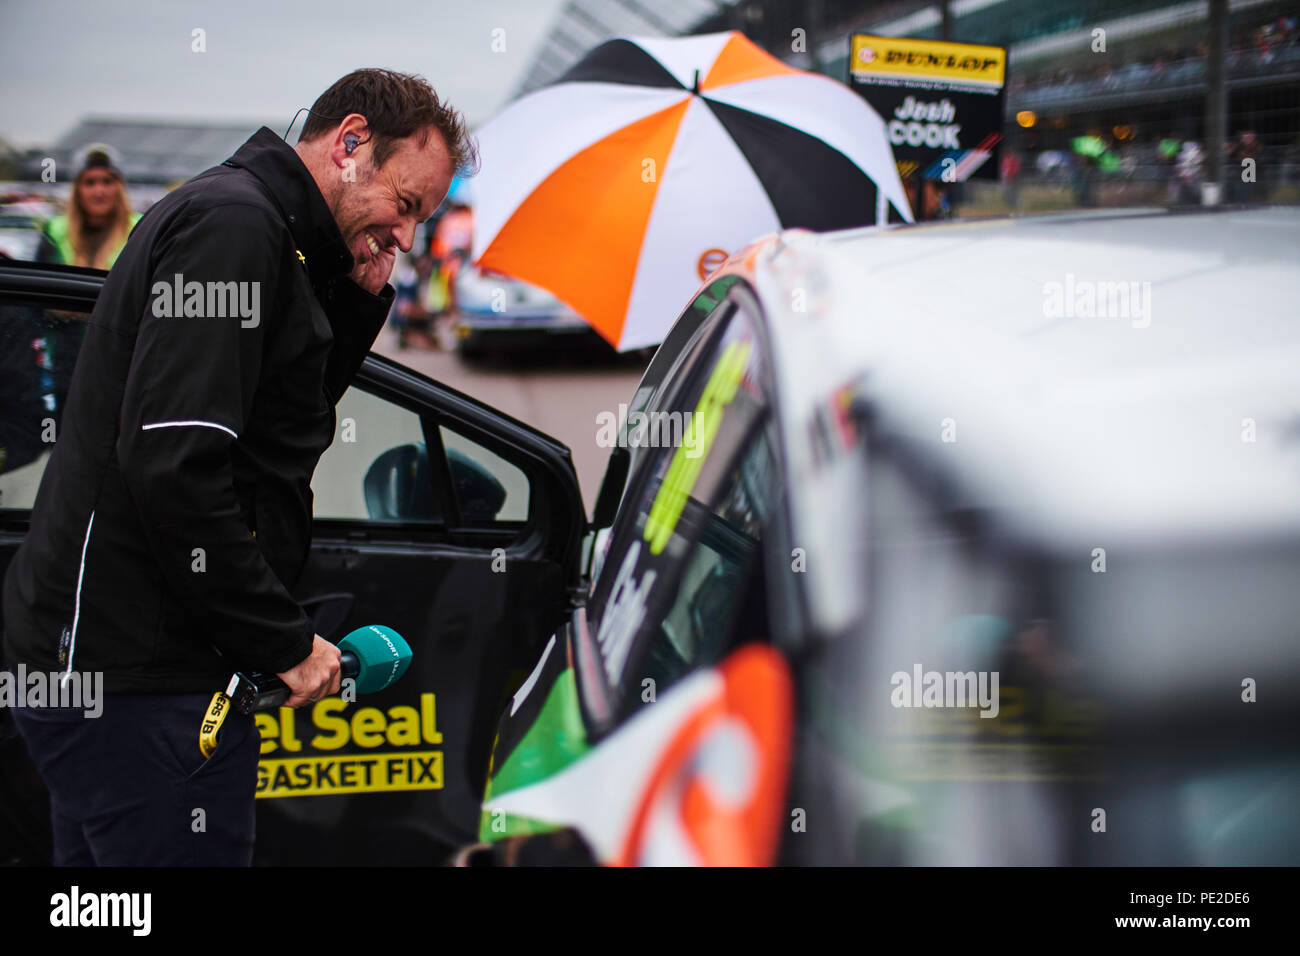 Corby, Northamptonshire, UK, 12th August 2018. ex BTCC racing driver and  ITV Sport presenter Paul O'Neill during the Dunlop MSA British Touring Car  Championship at Rockingham Motor Speedway. Photo by Gergo Toth /